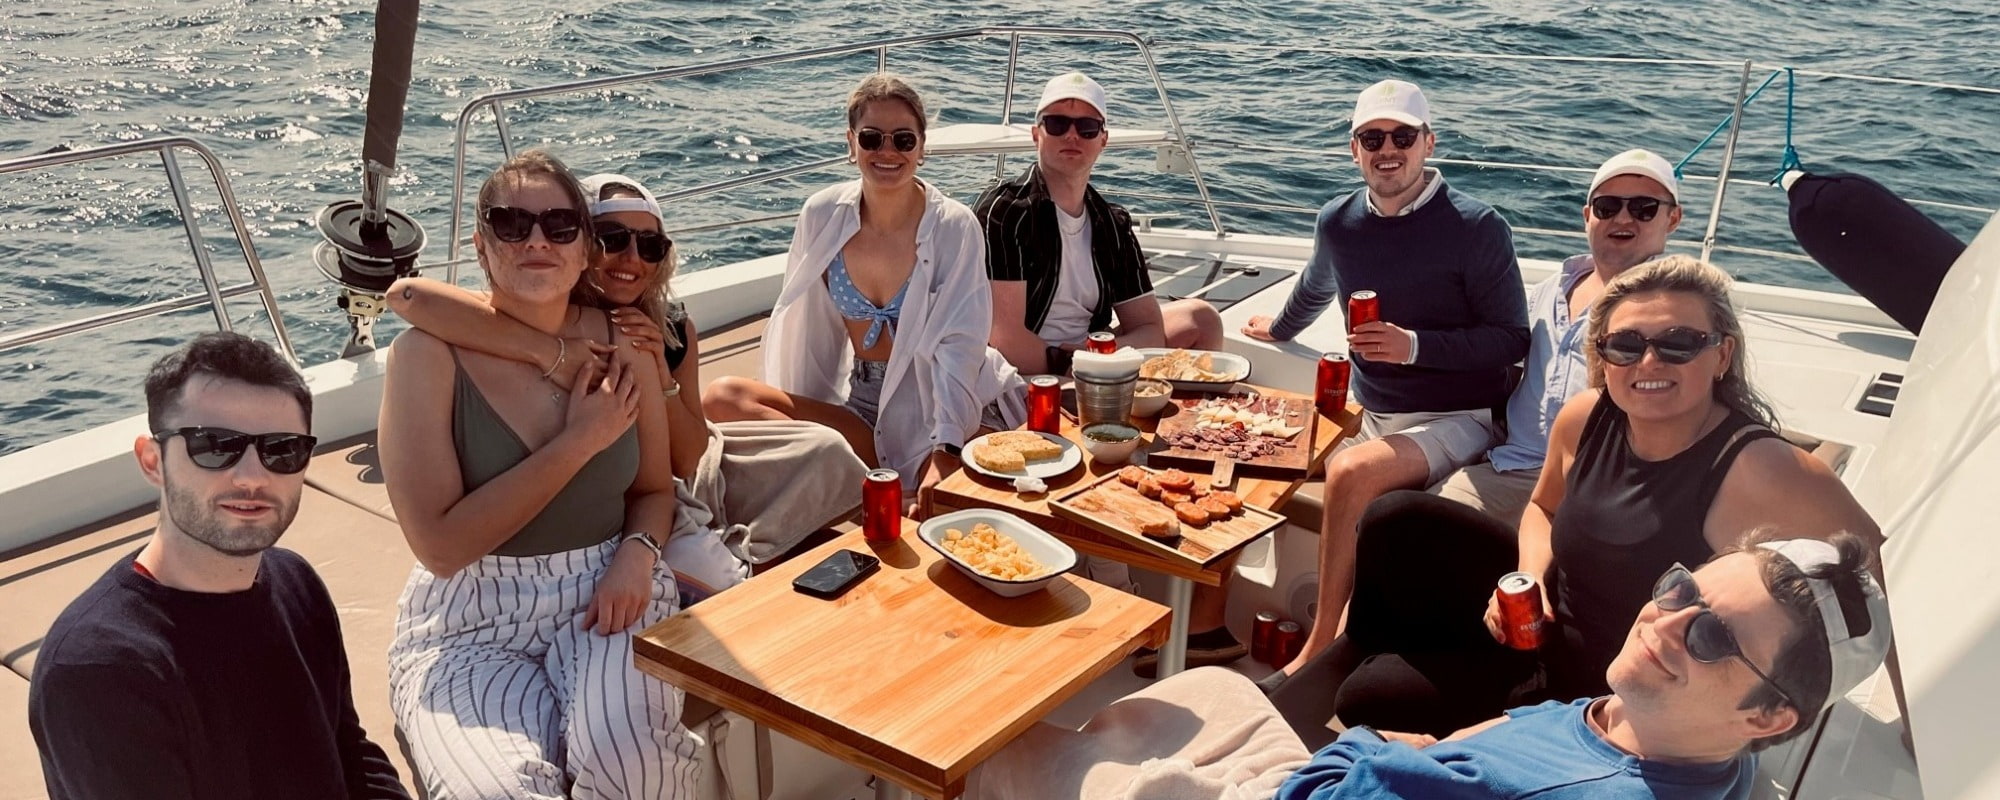 Friendly recruitment team who supply clean energy jobs across the UK on a boat in Barcelona for their team incentive annual trip 